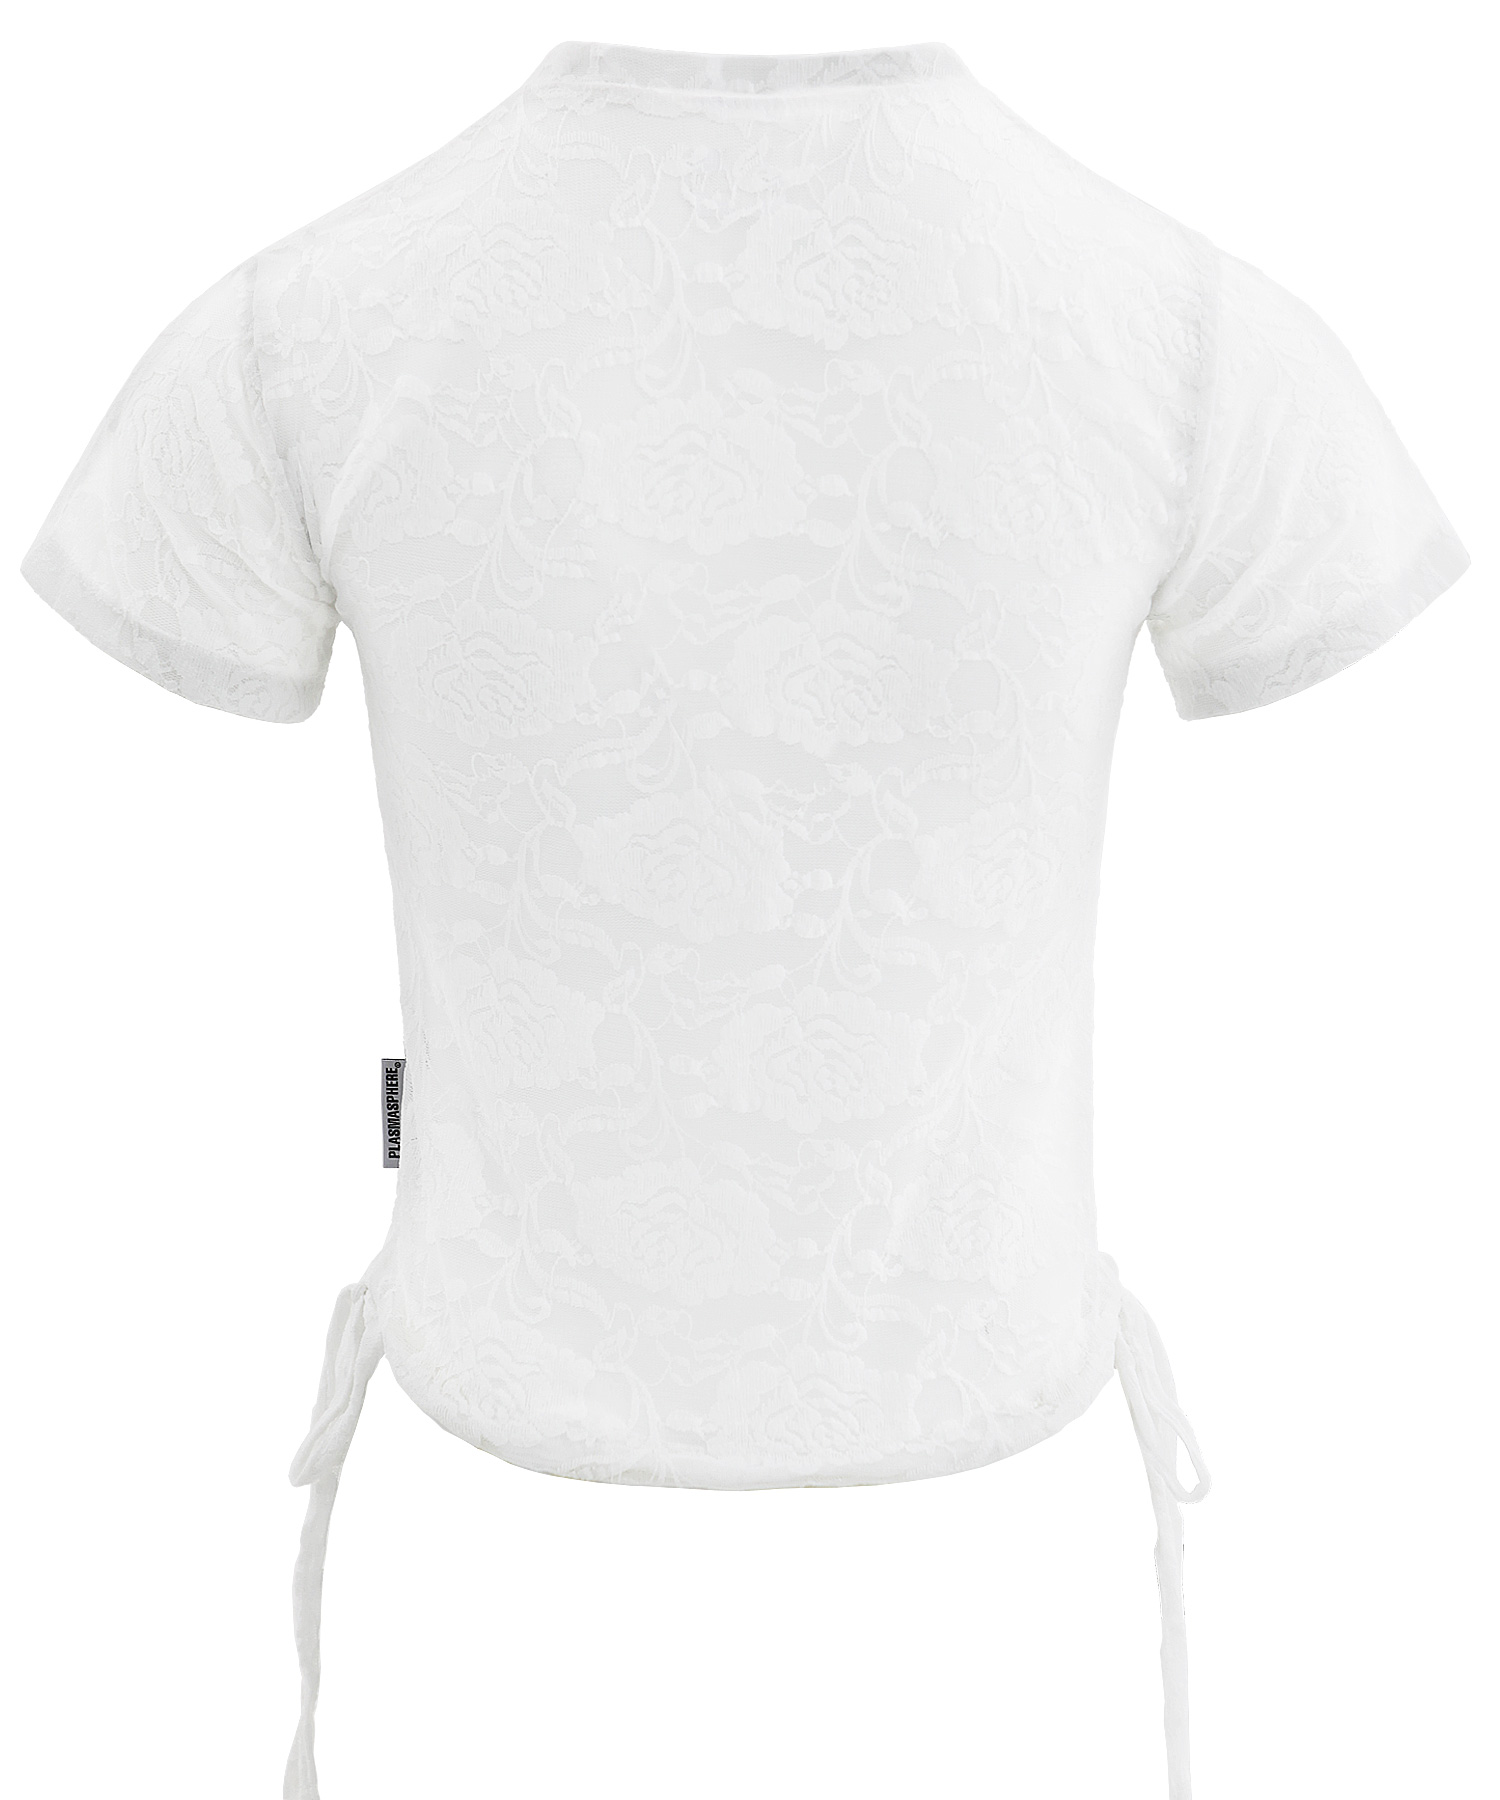 LACE-SHIRT IN WHITE pre-order delivery May 21